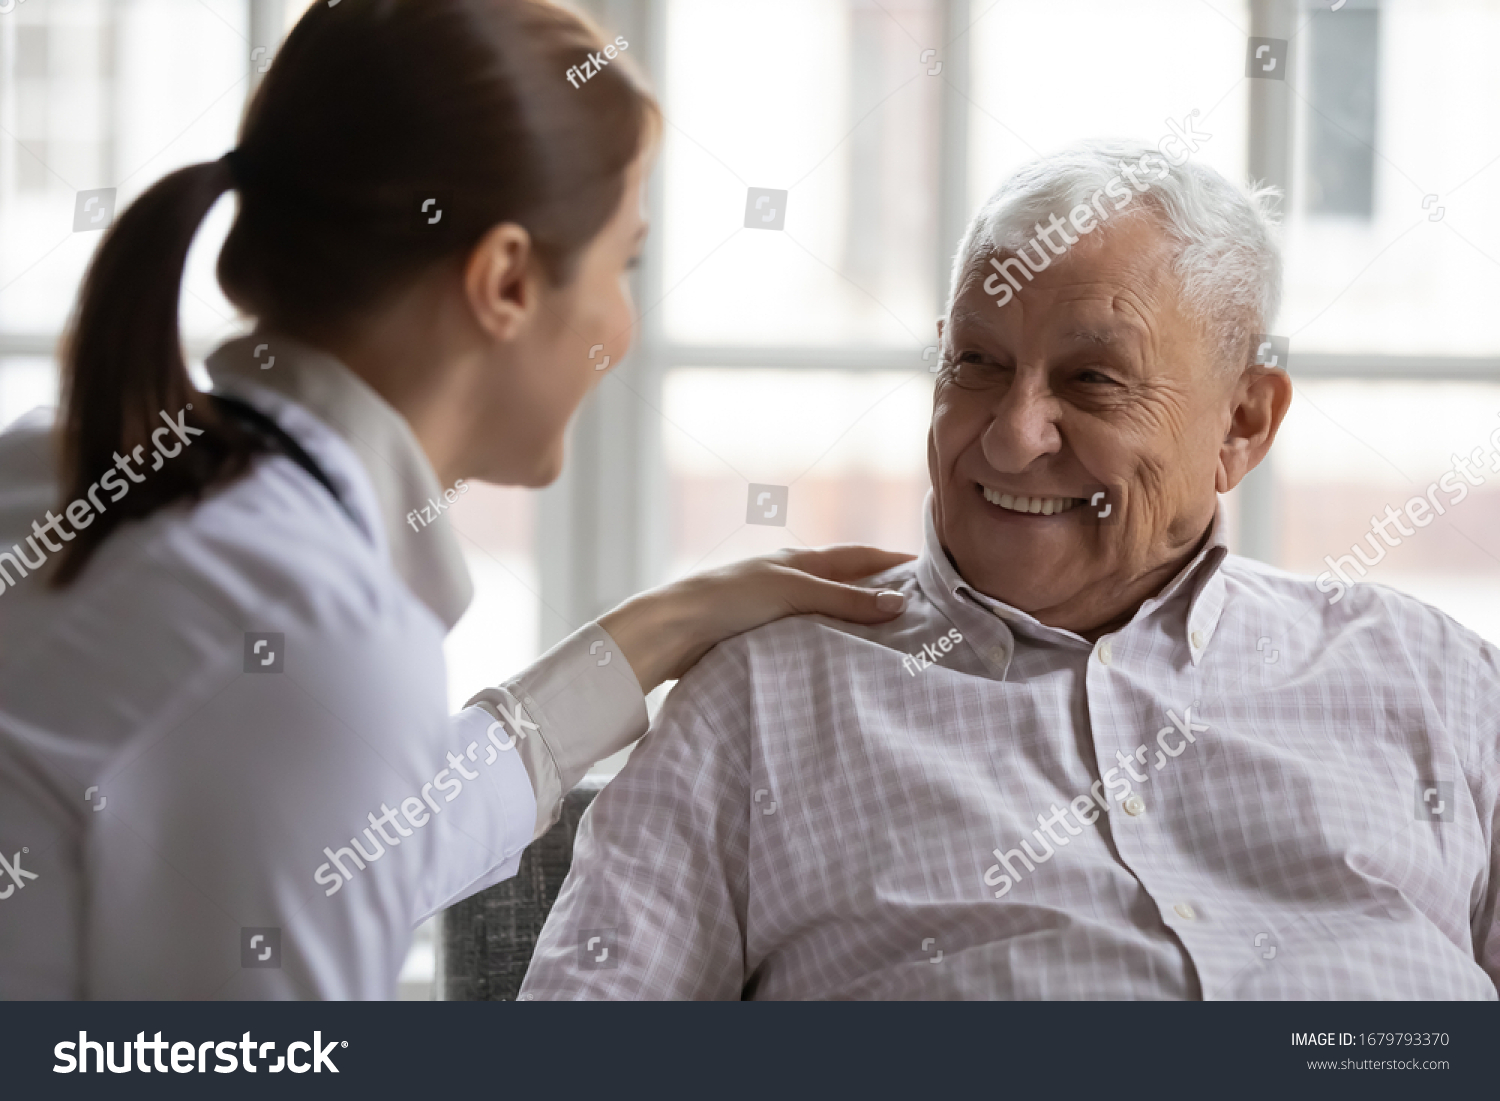 Caring geriatric nurse in white coat cares for grey-haired elderly man in nursing home, listen him relieve solitude, provide support help during visit at home. Homecare eldercare caregiving concept #1679793370